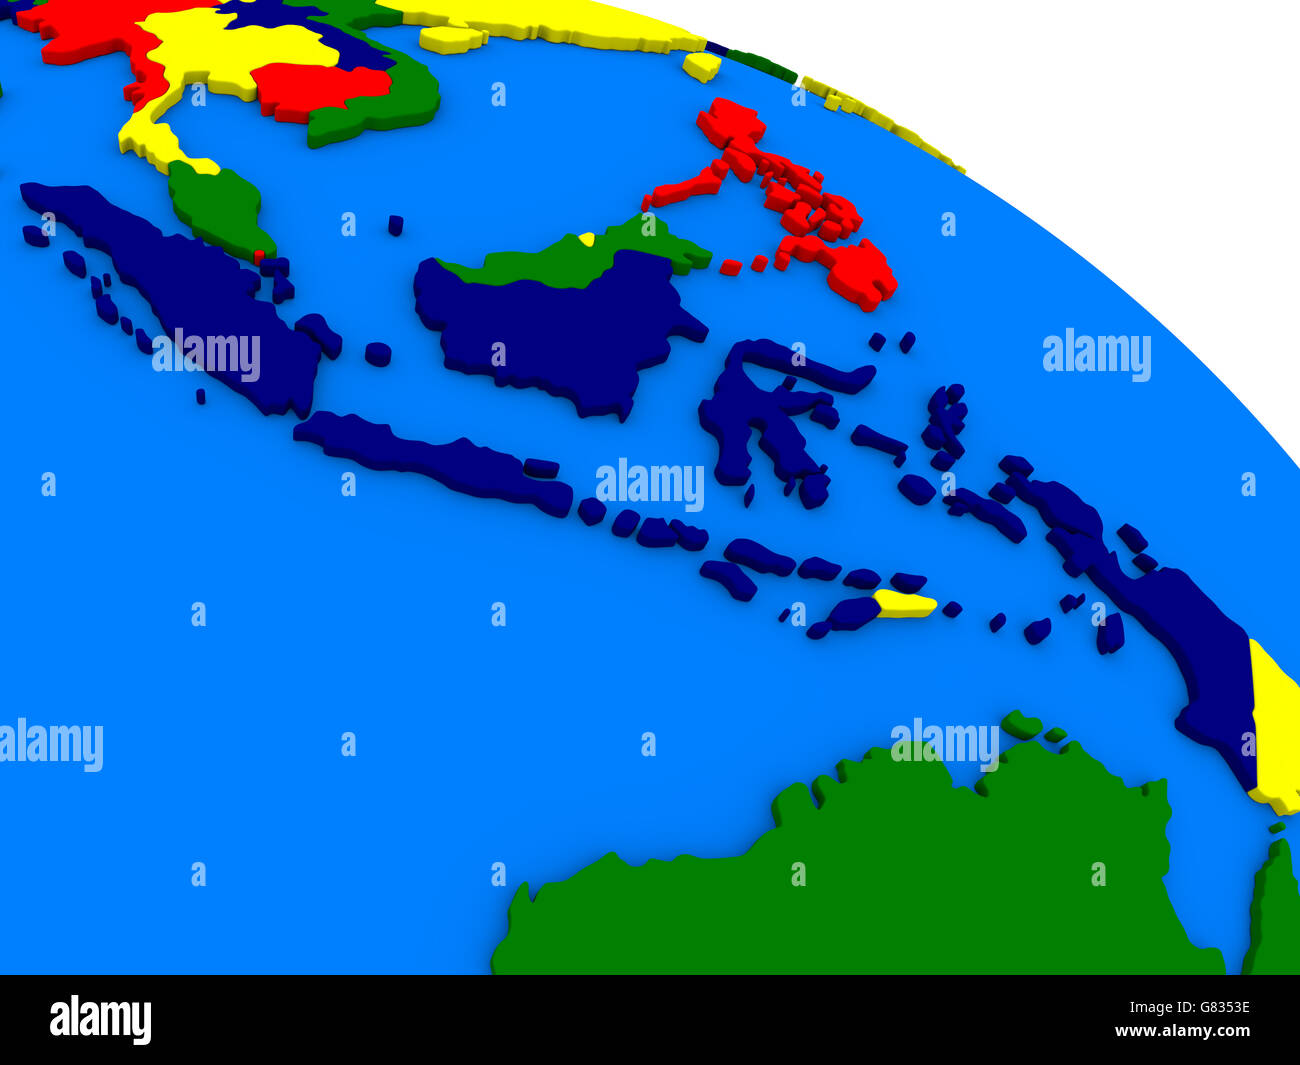 Indonesia on colorful political globe. 3D illustration Stock Photo